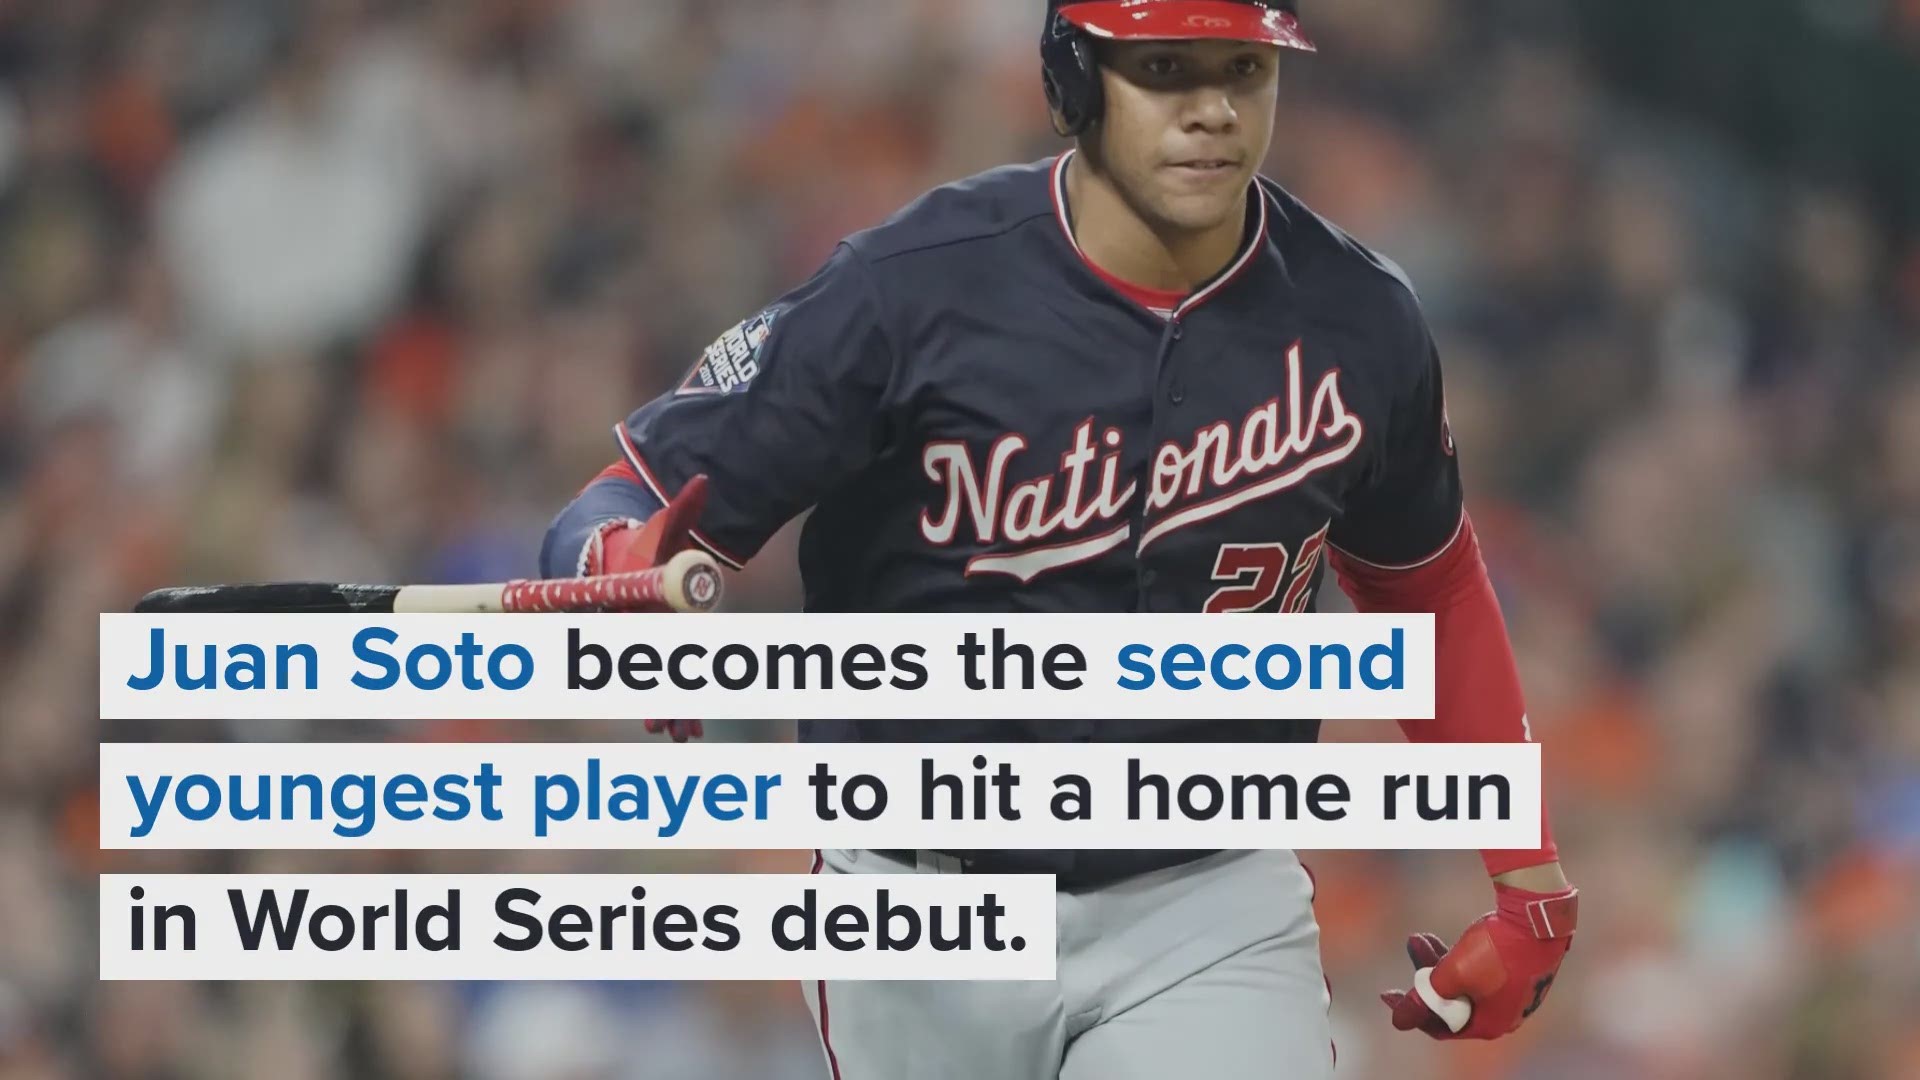 A Juan Soto solo home run helped the Washington Nationals tie the Houston Astros 2-2 in Game 1 of the 2019 World Series.